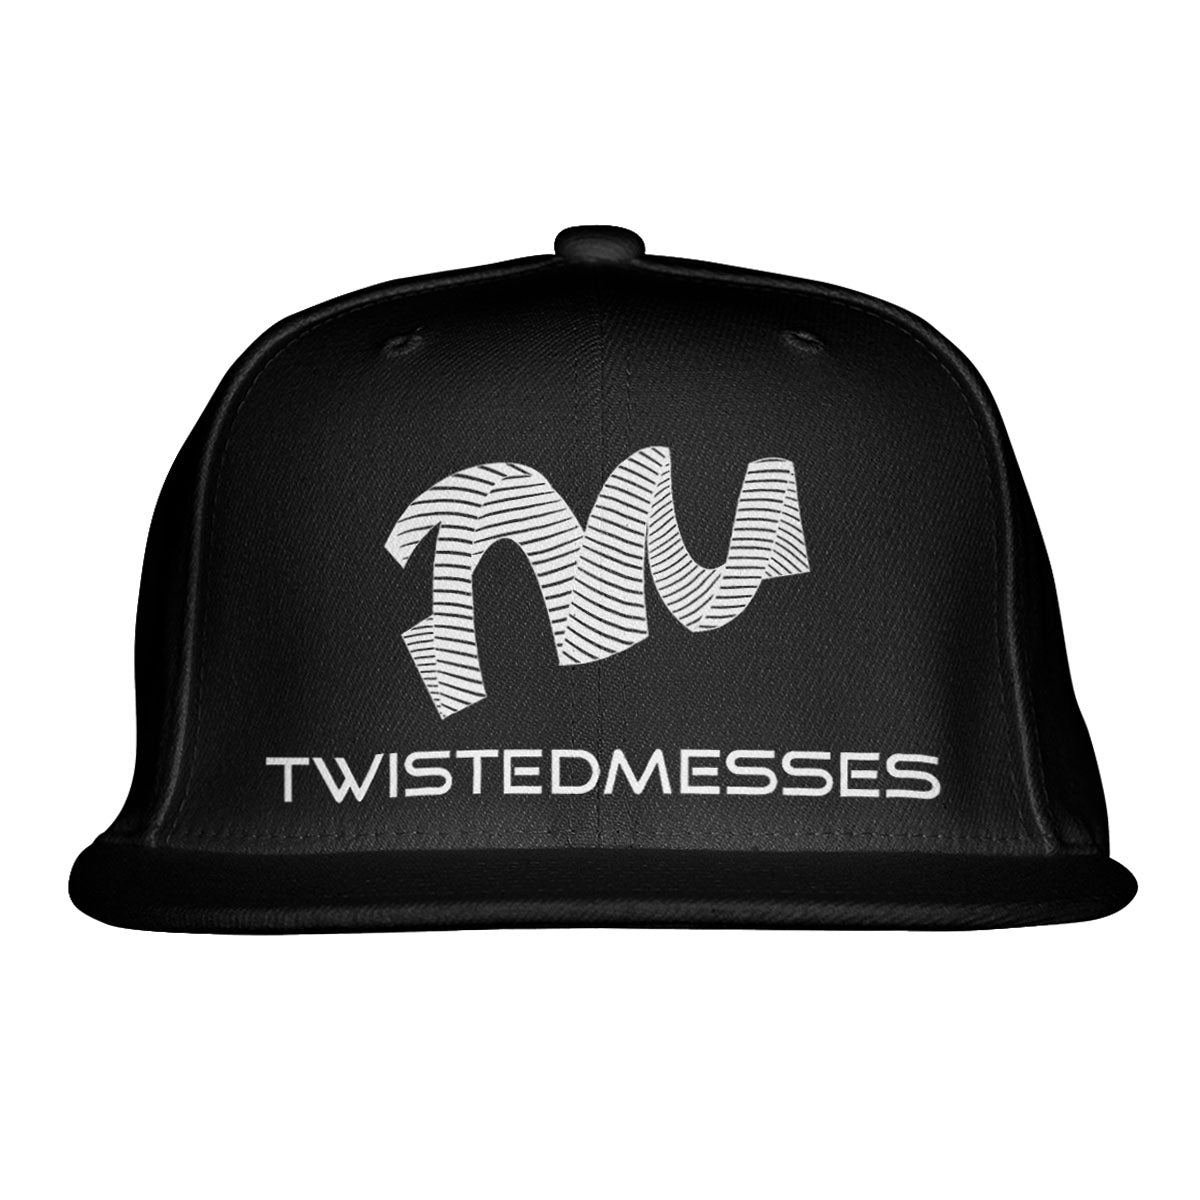 Snapback Black/White by Twisted Messes